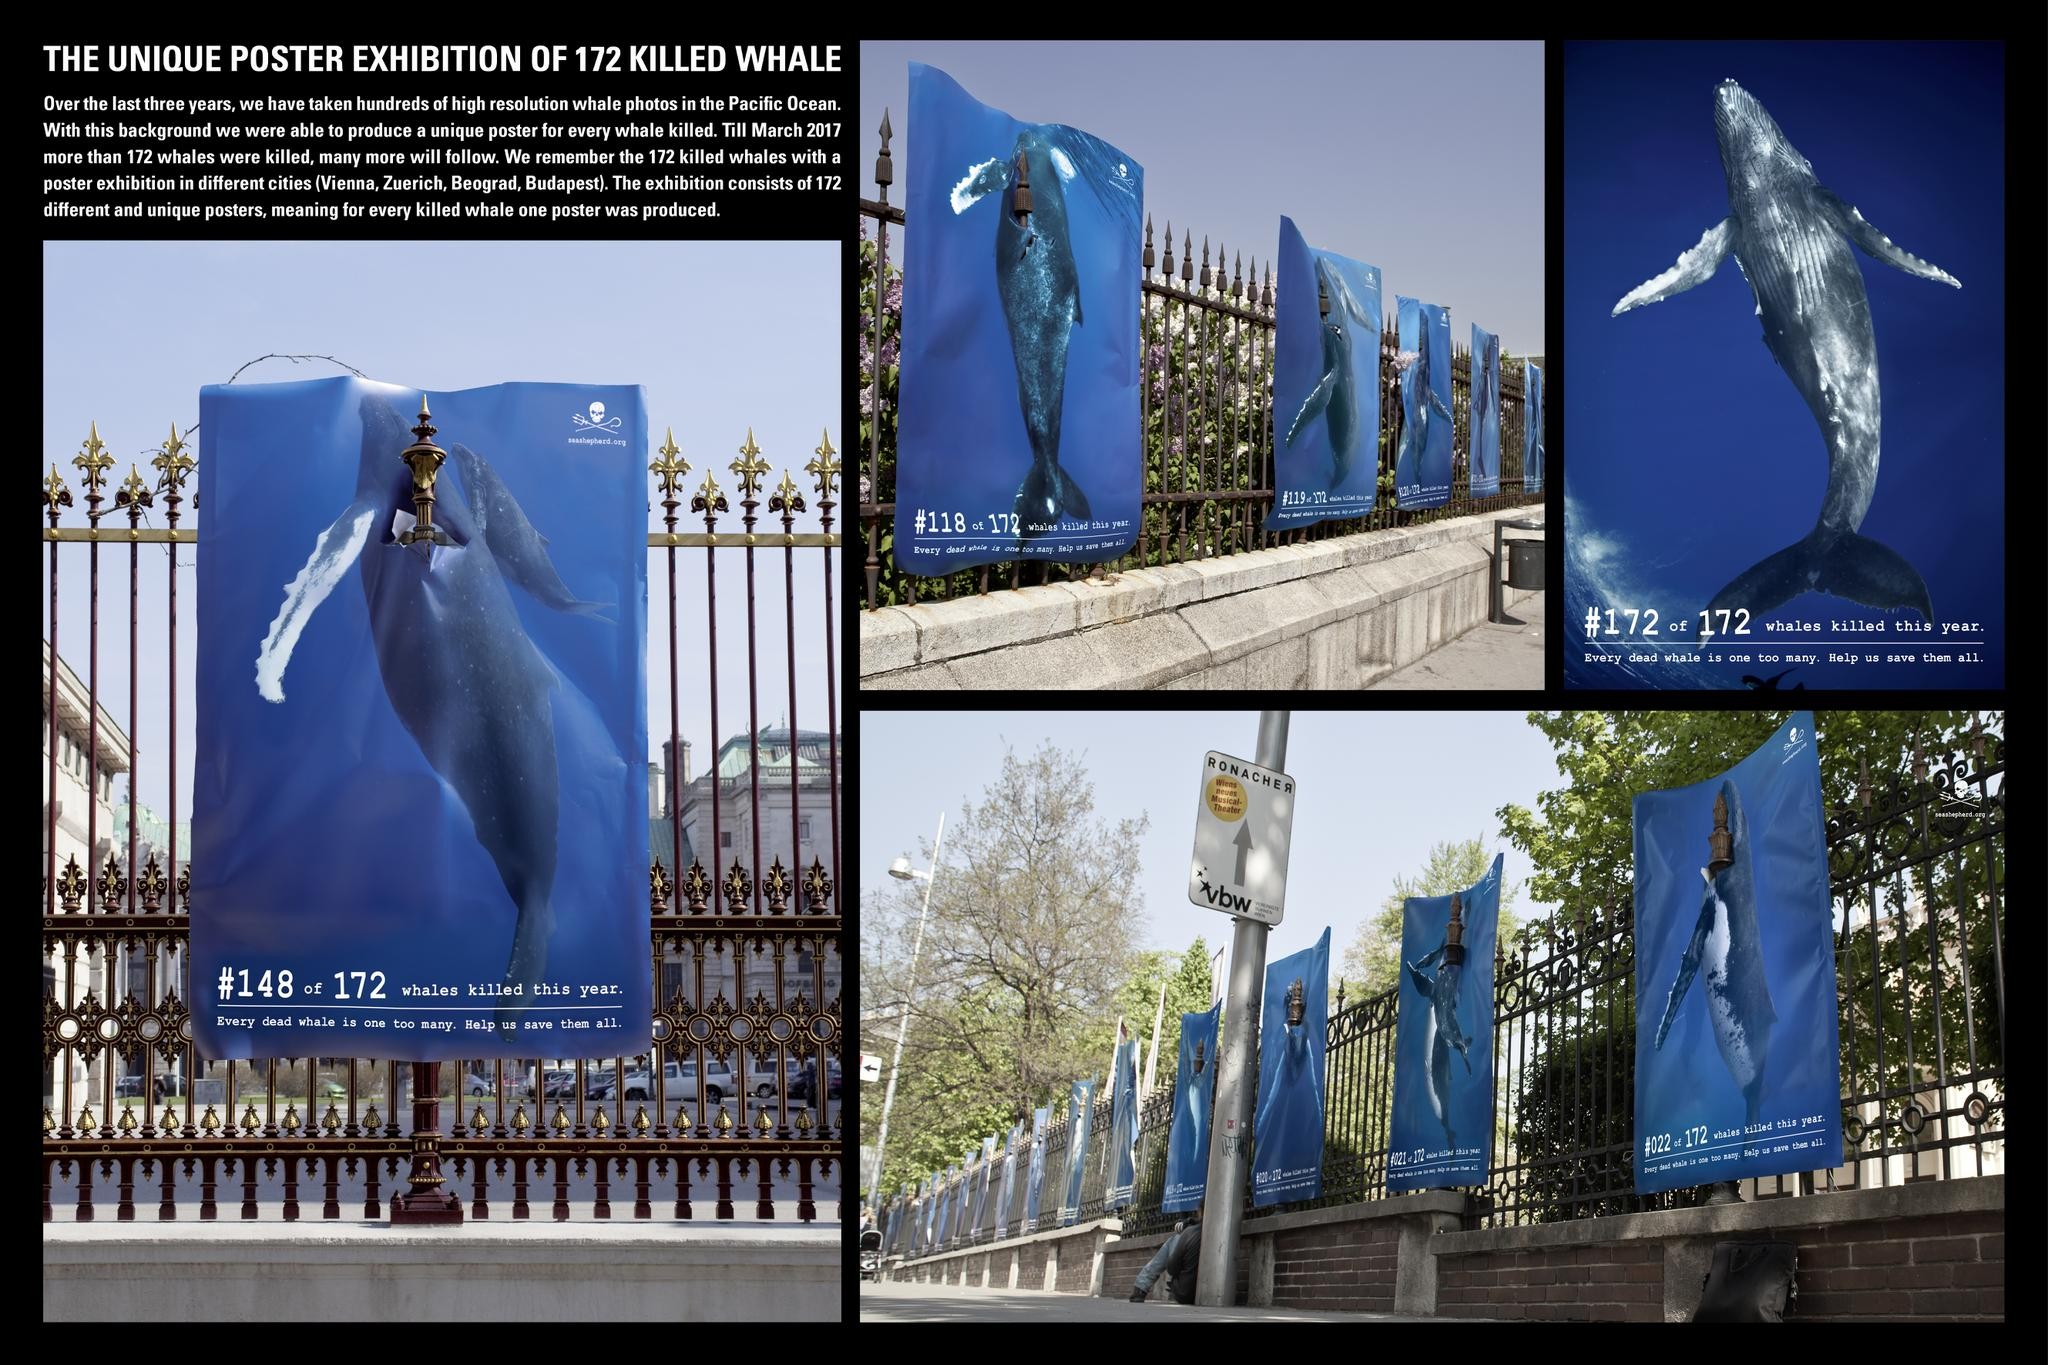 172 UNIQUE POSTERS FOR 172 KILLED WHALES